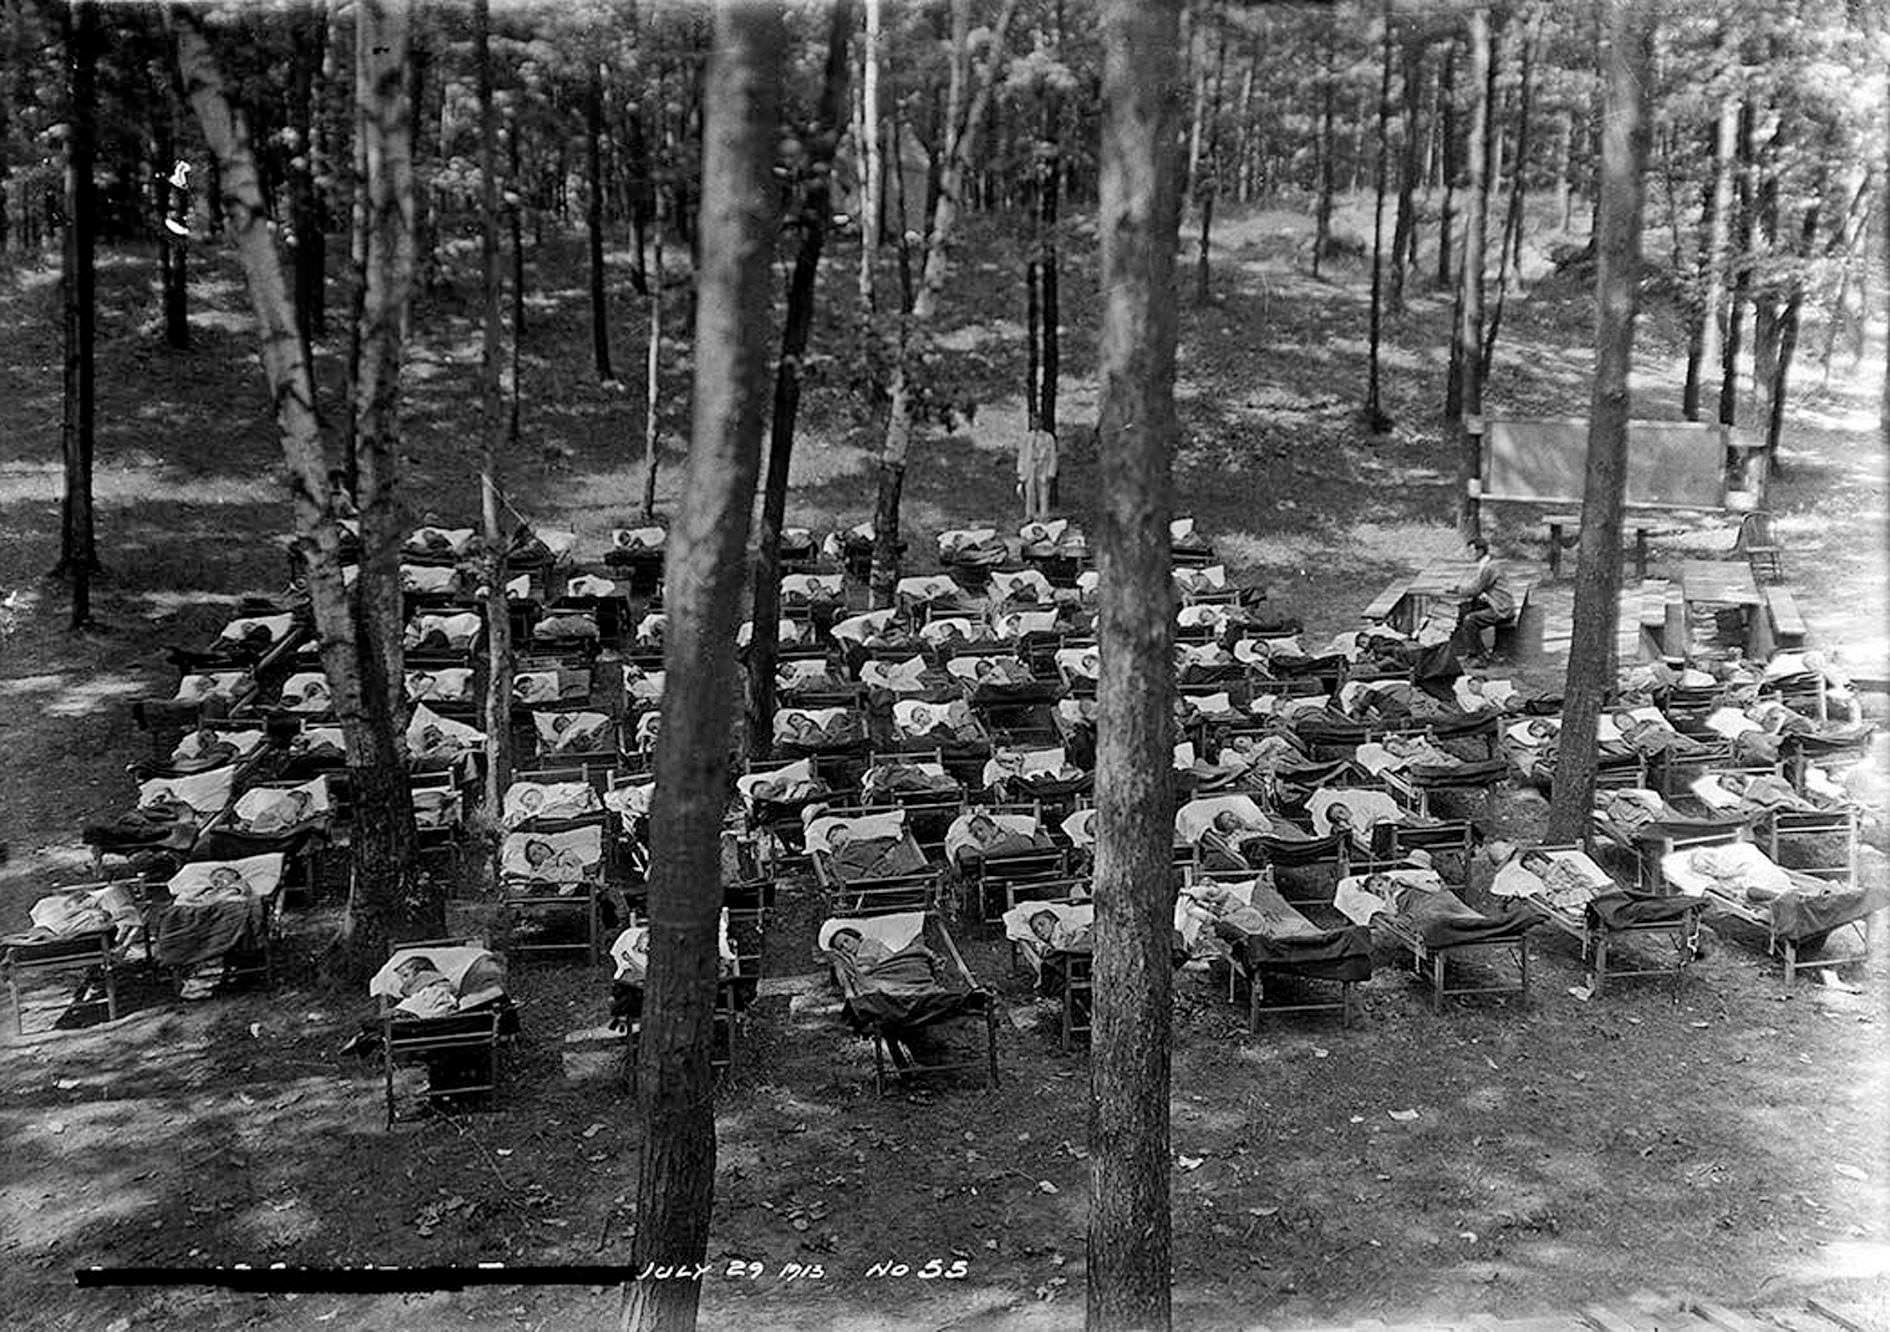 Victoria Park Forest School, July 29, 1913.